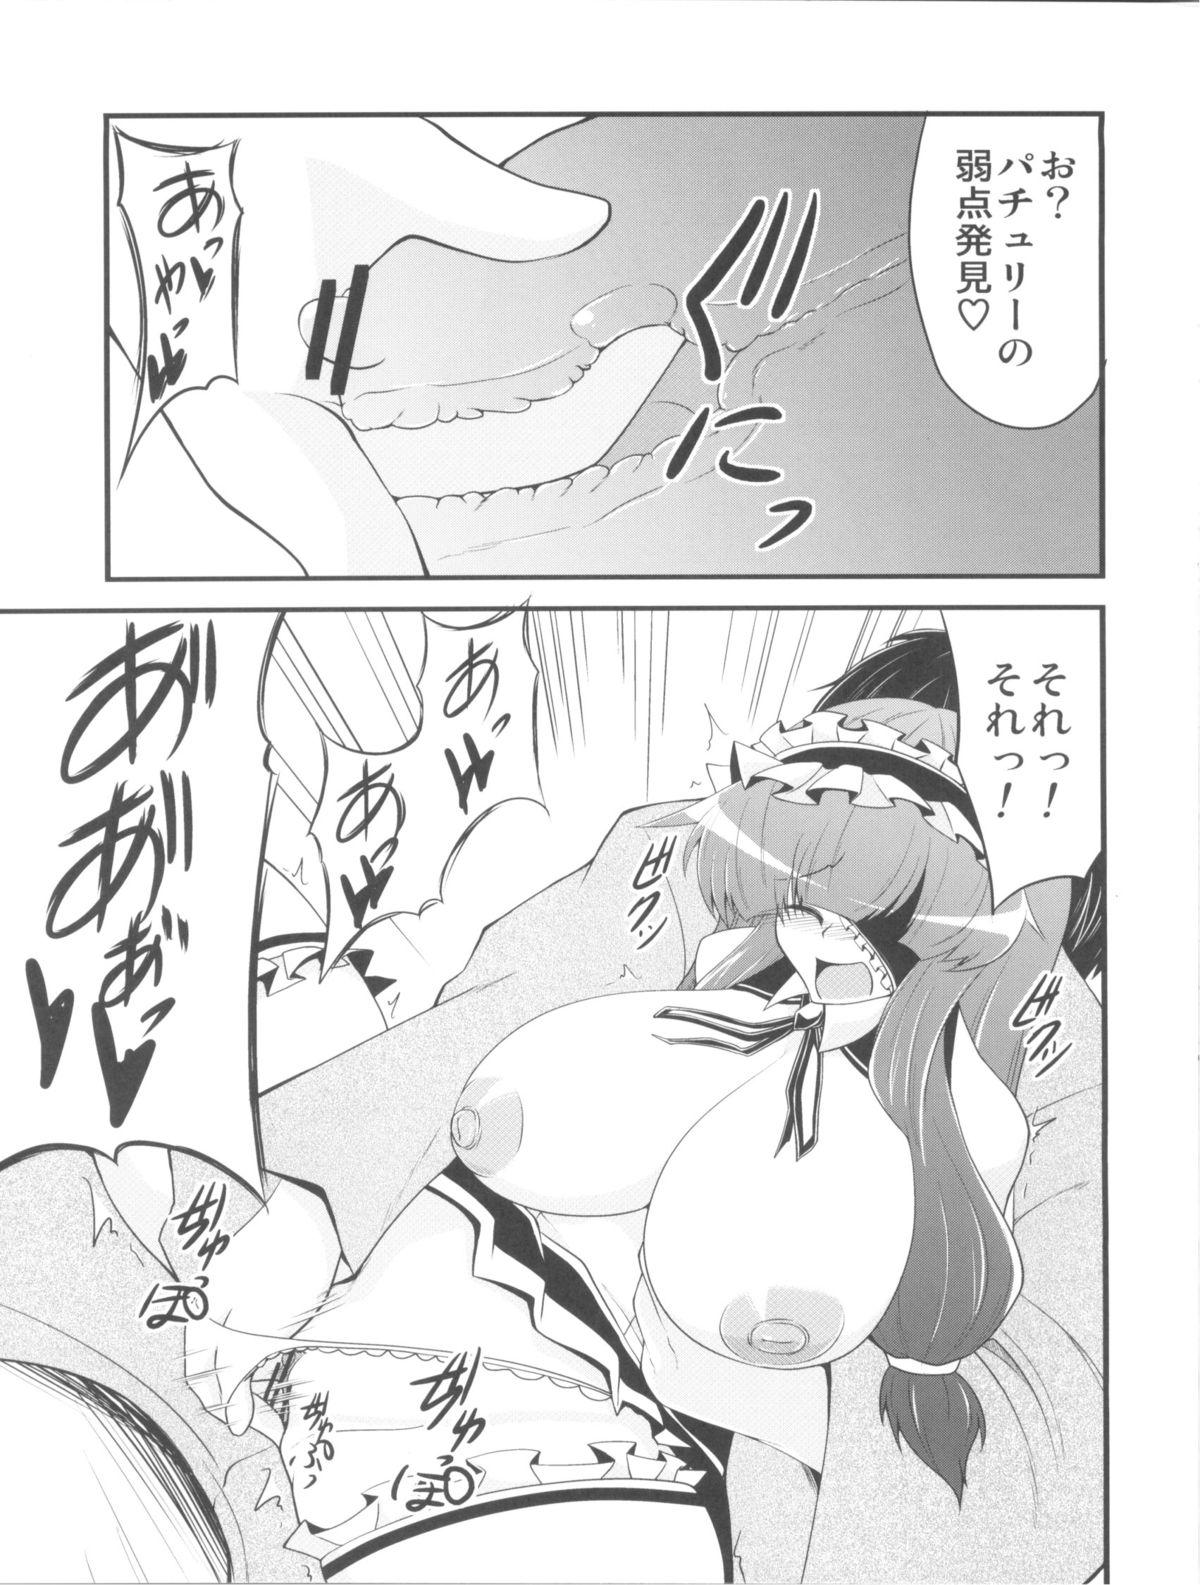 Creampies DCG - Touhou project Swedish - Page 12